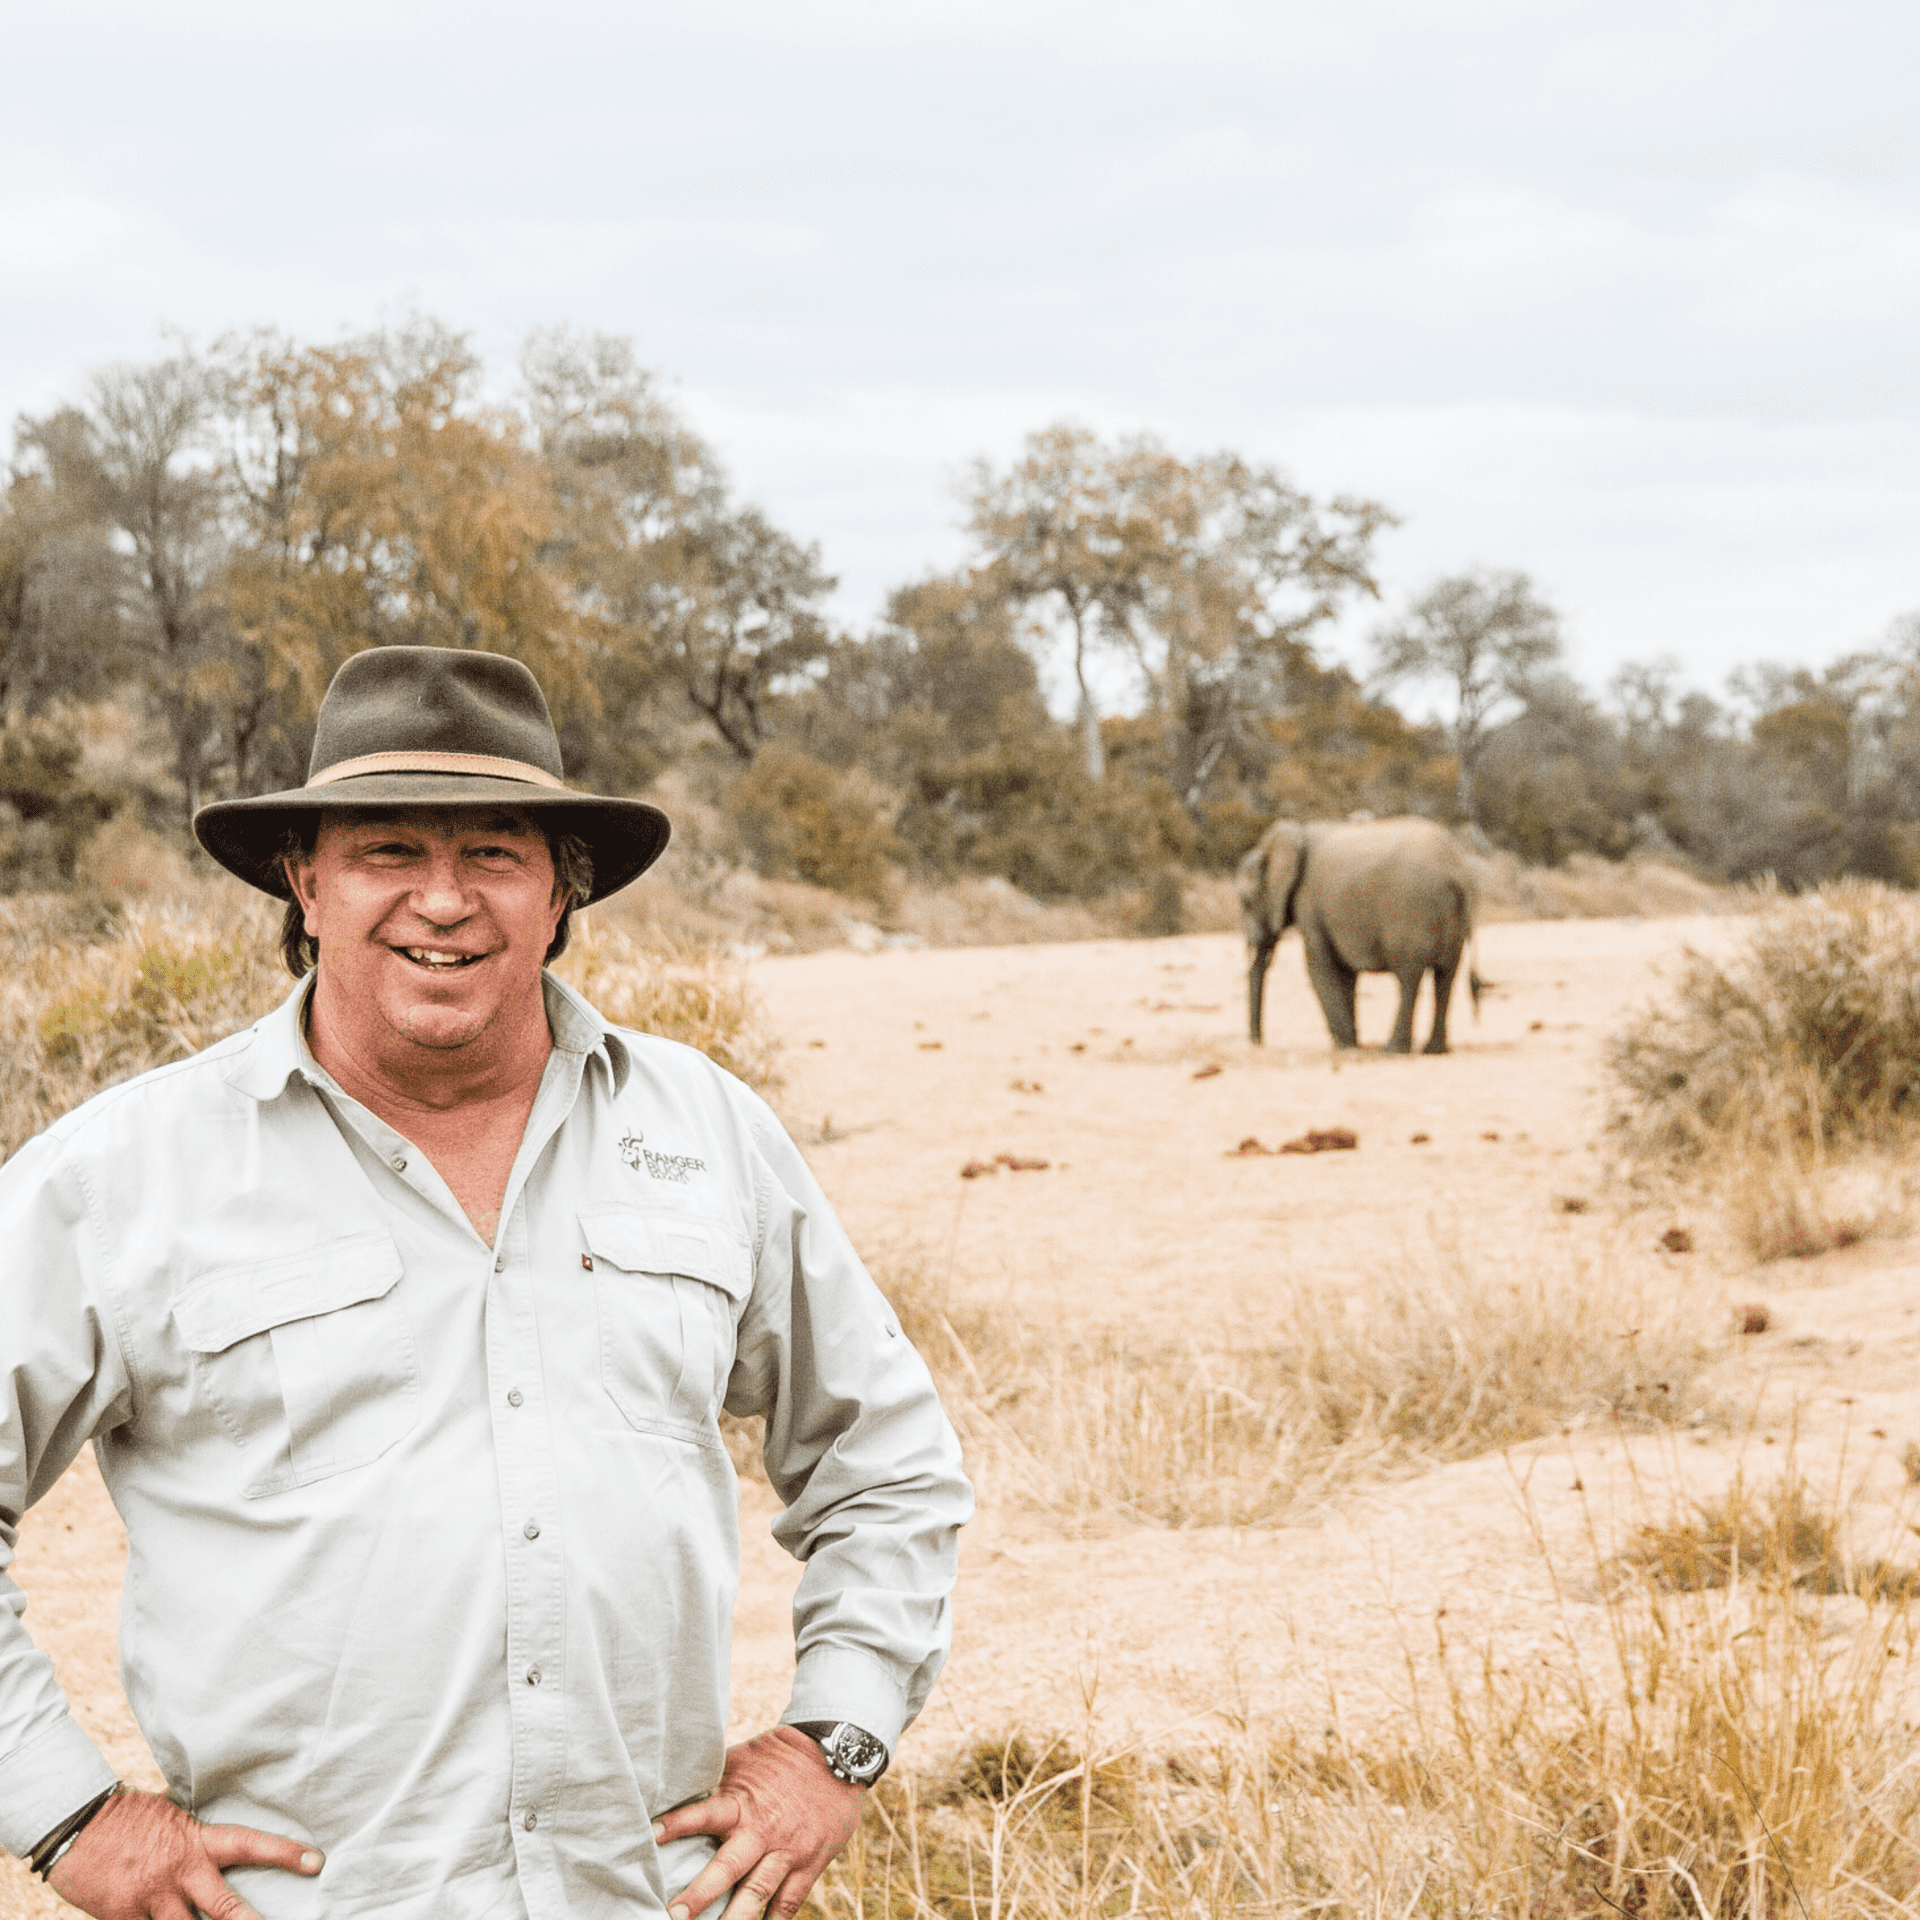 Ranger Buck Archie with elephant in background